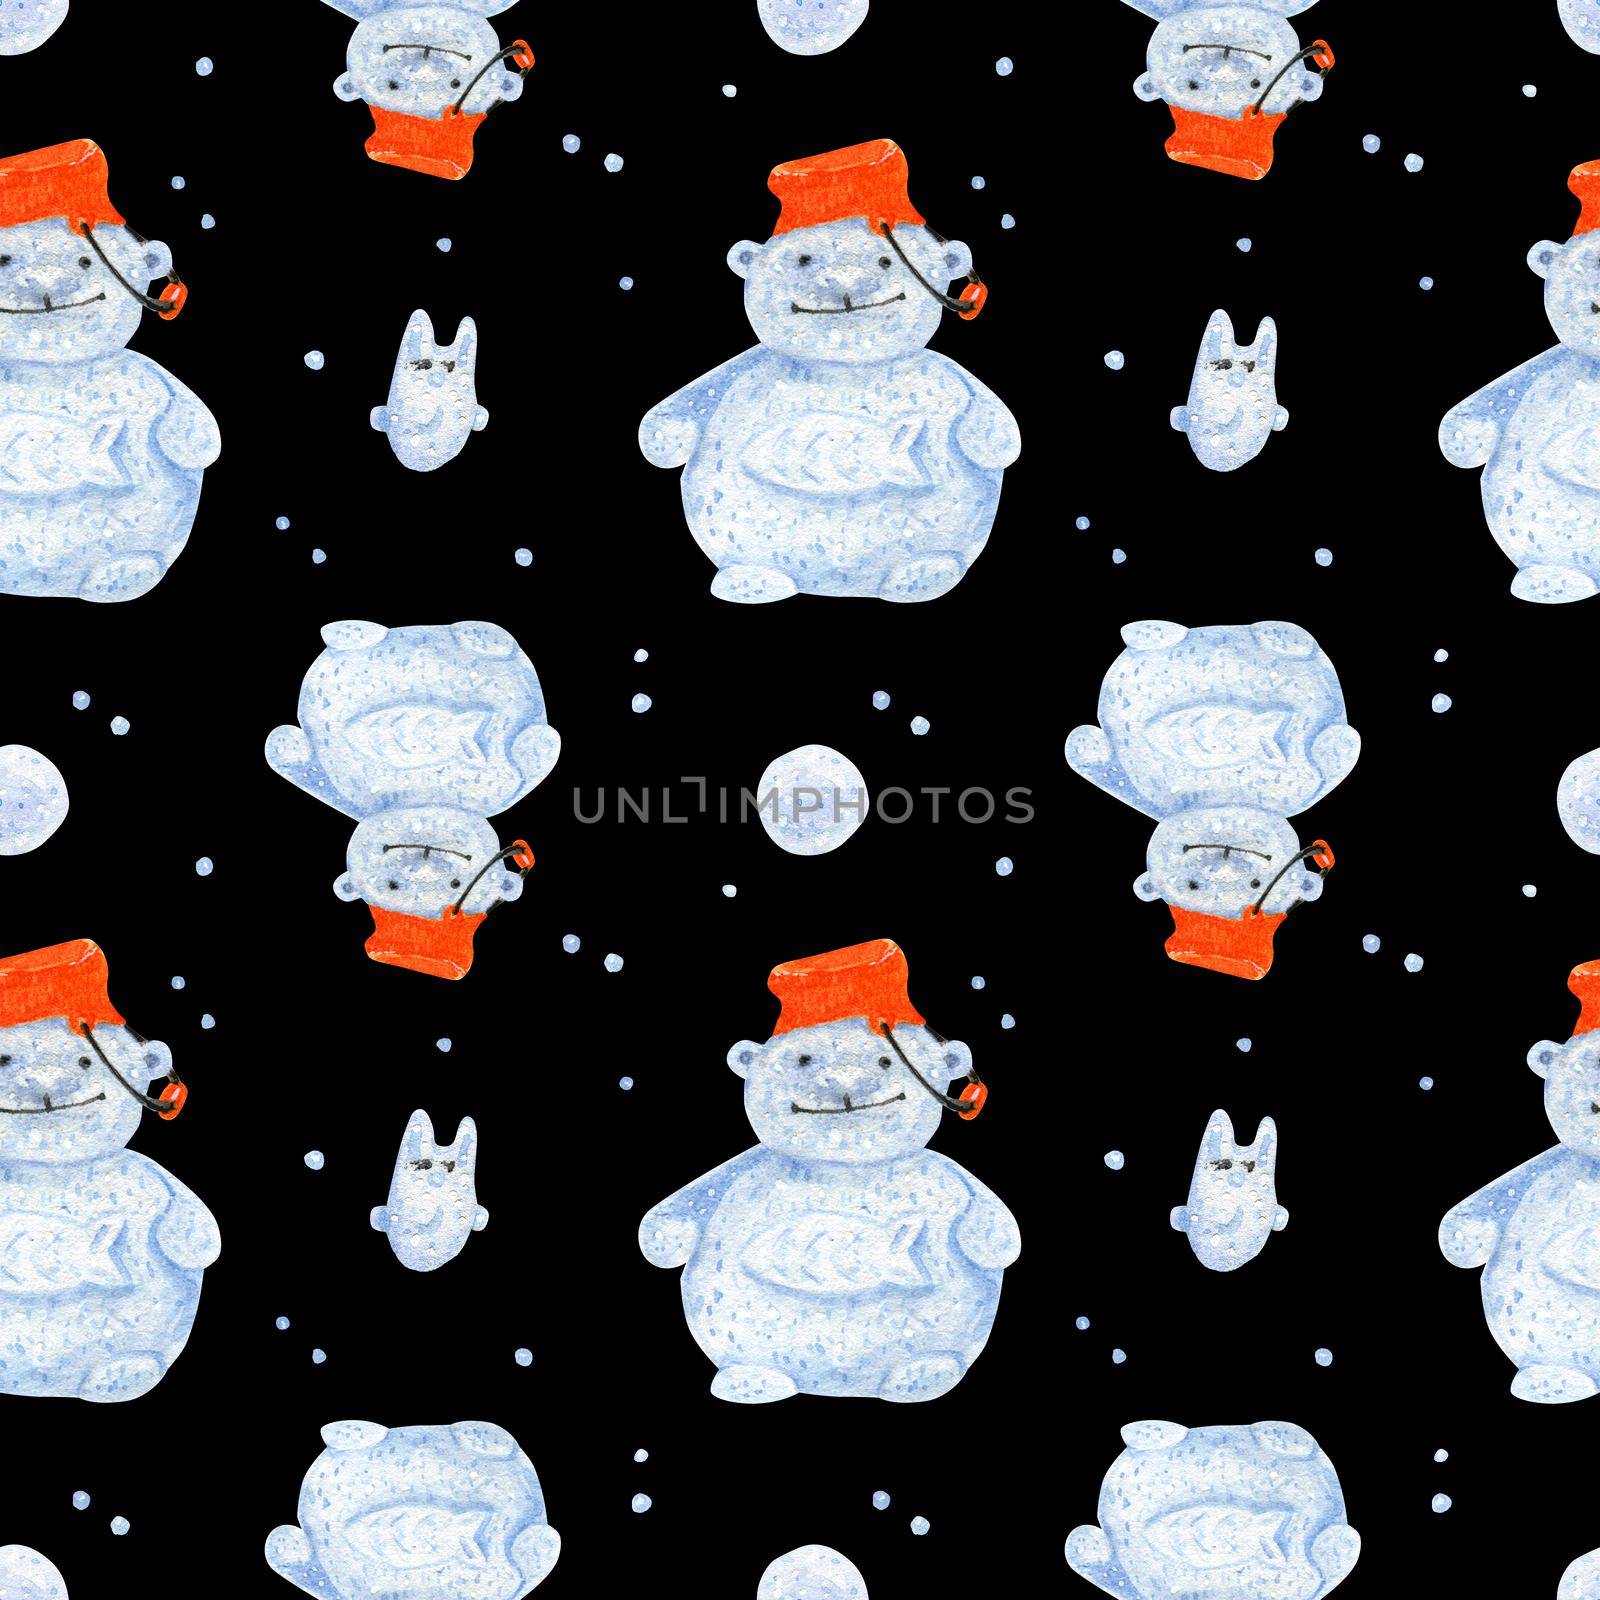 Polar bear snowman. Watercolor seamless patterns for textile, wrapping paper and any tiled design. Black background, clipping path uncluded